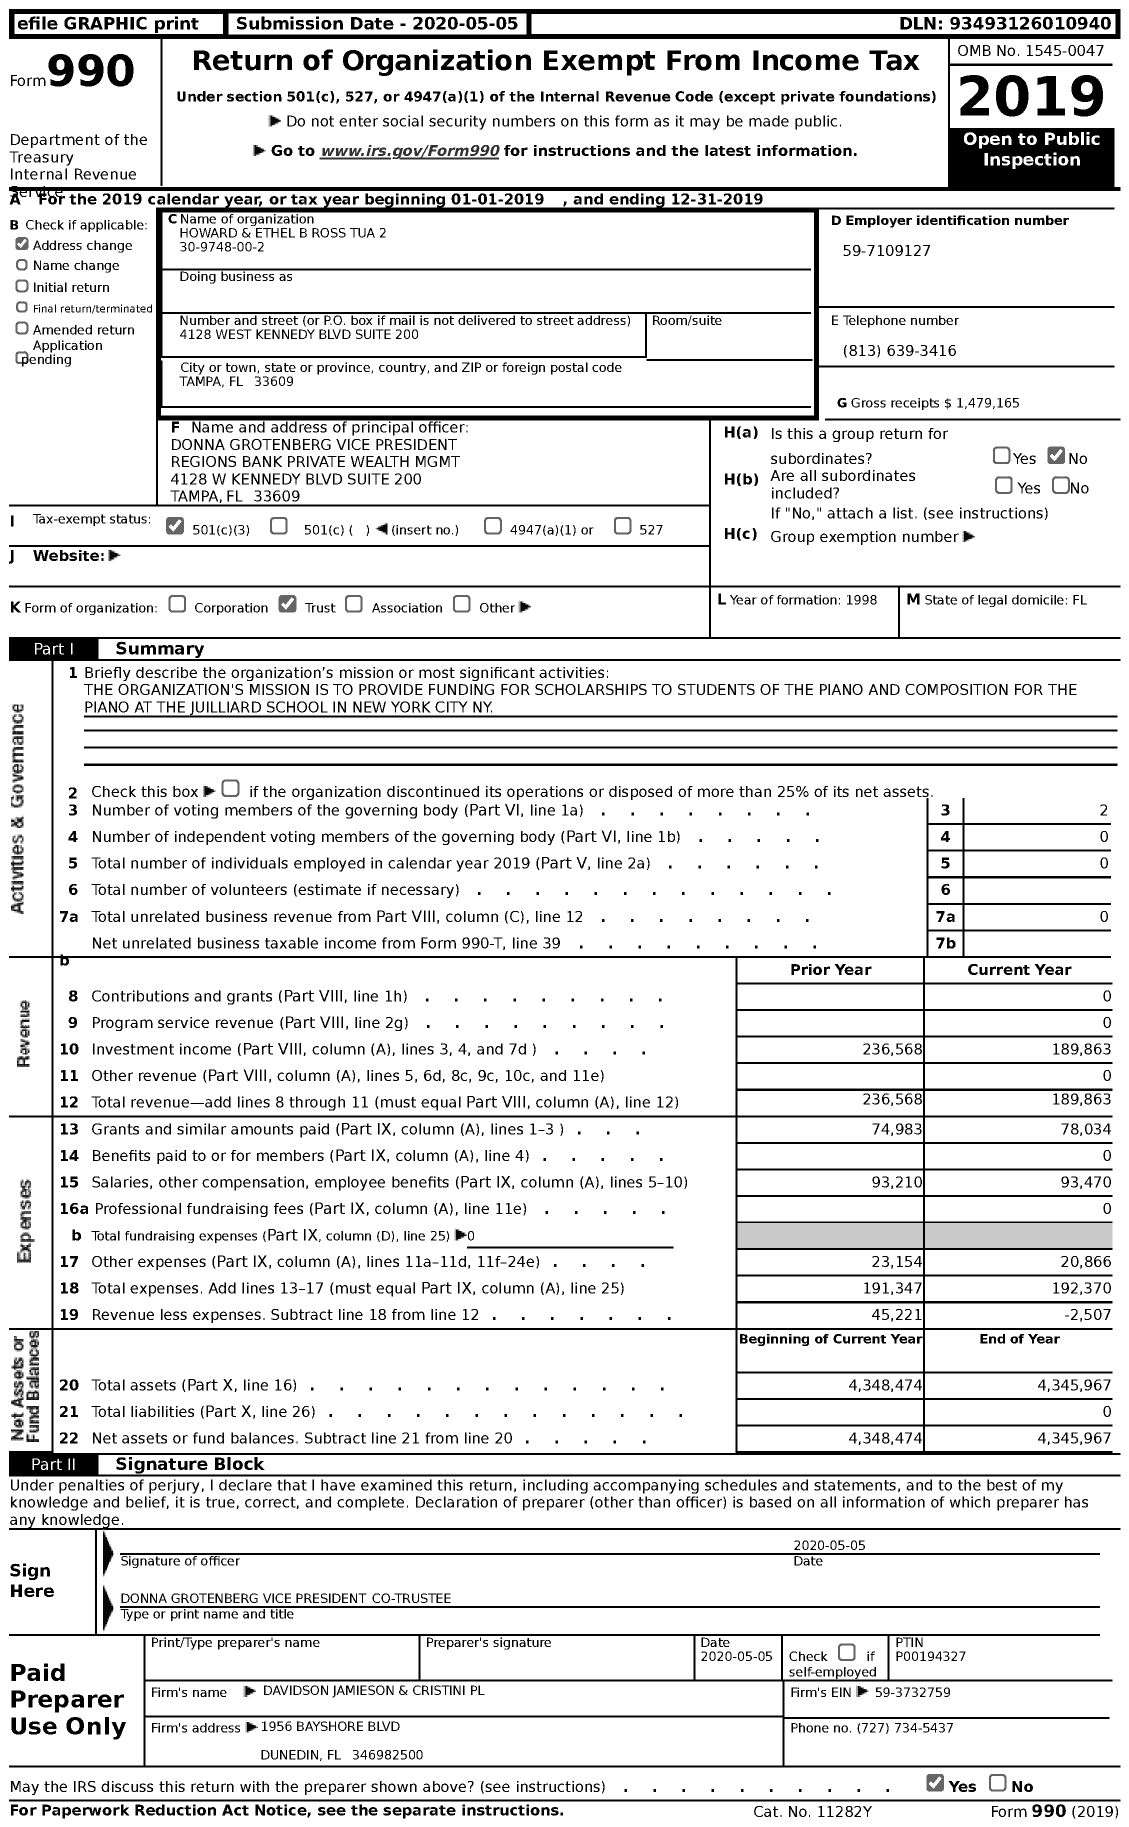 Image of first page of 2019 Form 990 for Howard and Ethel B Ross TUA 2 30-9748-00-2